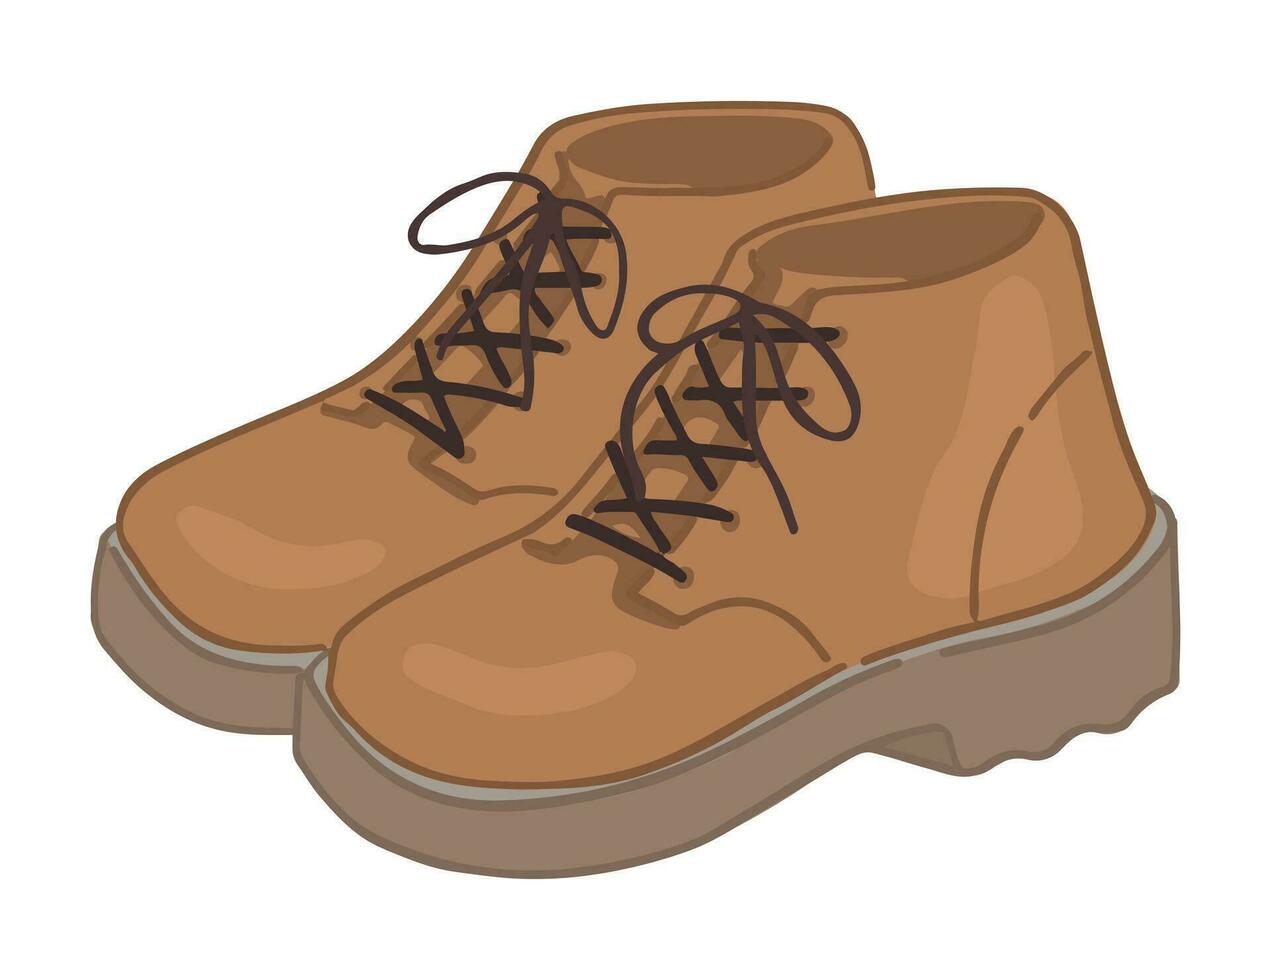 Doodle of classic men shoes. Cartoon clipart of autumn footwear. Contemporary vector illustration isolated on white background.